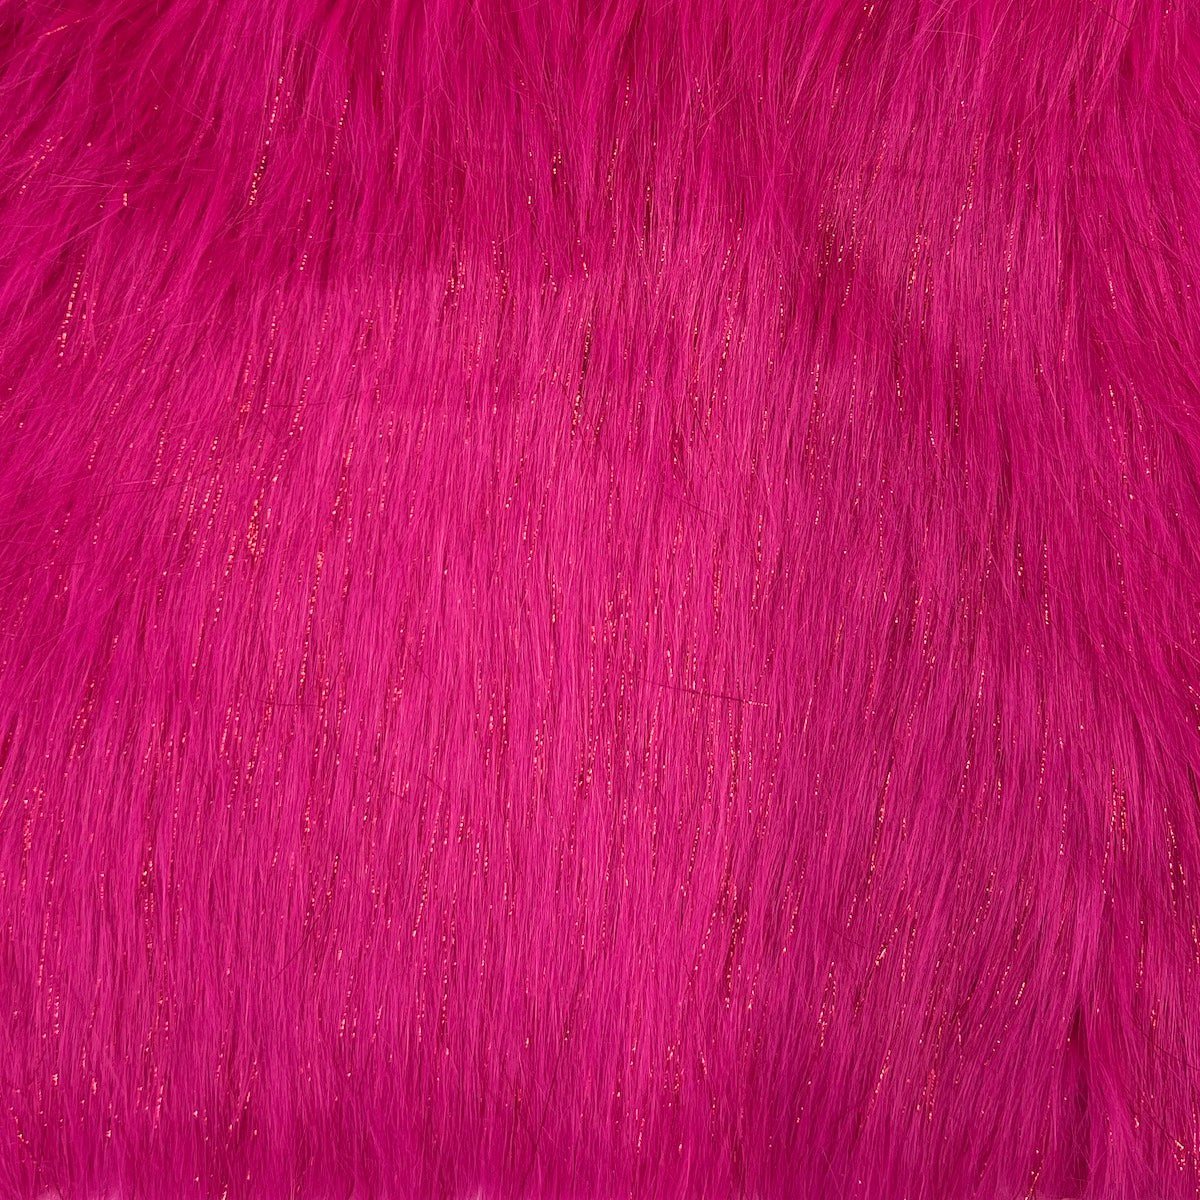 Hot Pink Tinsel Sparkle Glitter Long Pile Shaggy Faux Fur Fabric Sold by  the Yard 60 